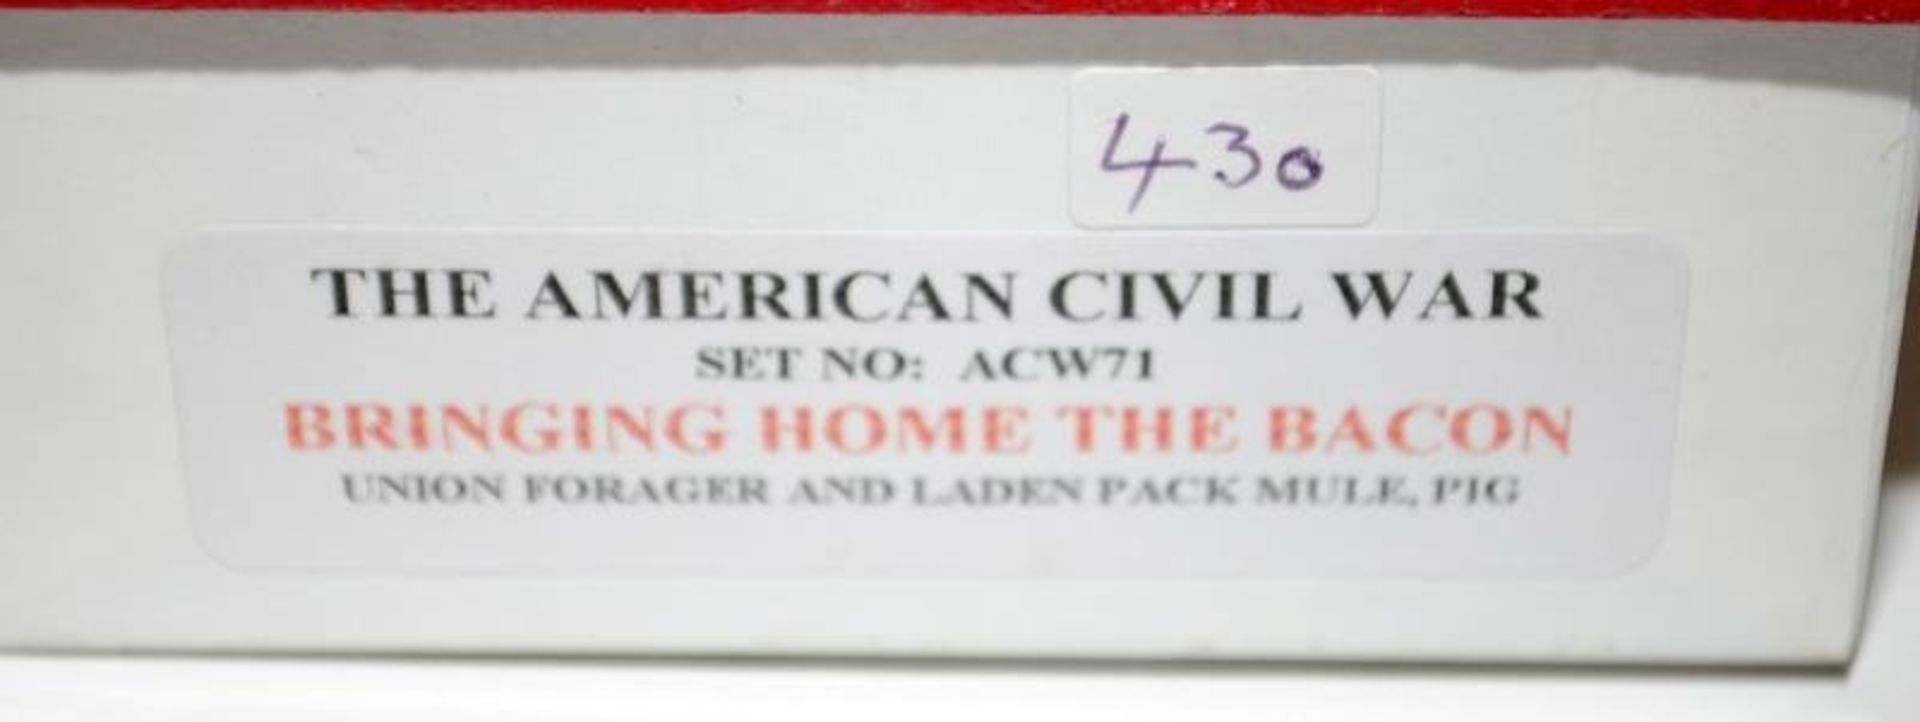 Trophy Miniatures American Civil War series Bringing Home the Bacon ref:ACW71. Boxed - Image 2 of 2